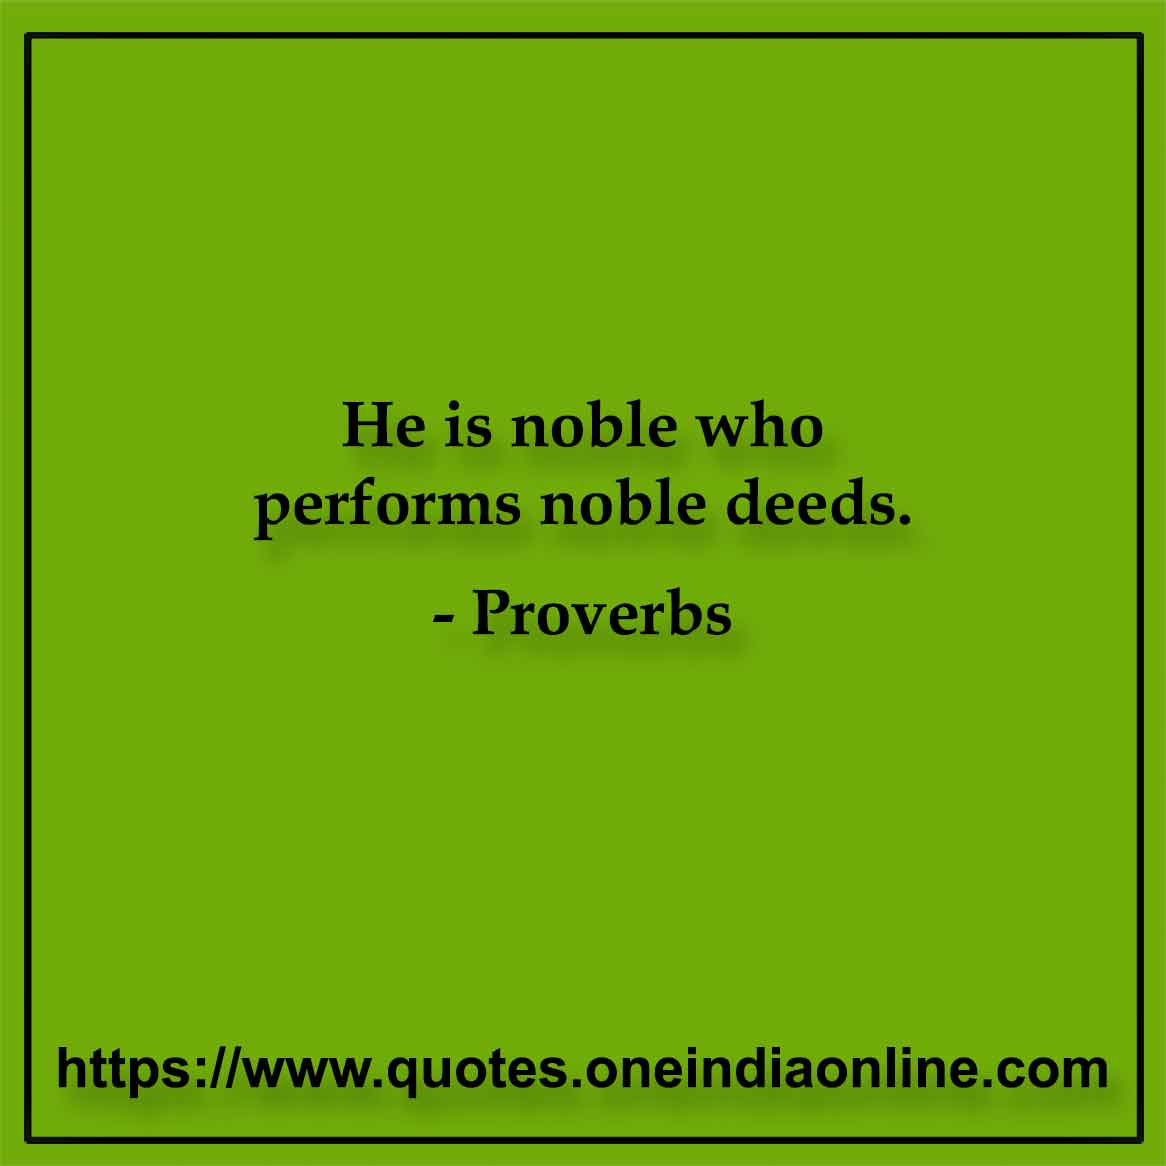 He is noble who performs noble deeds.

